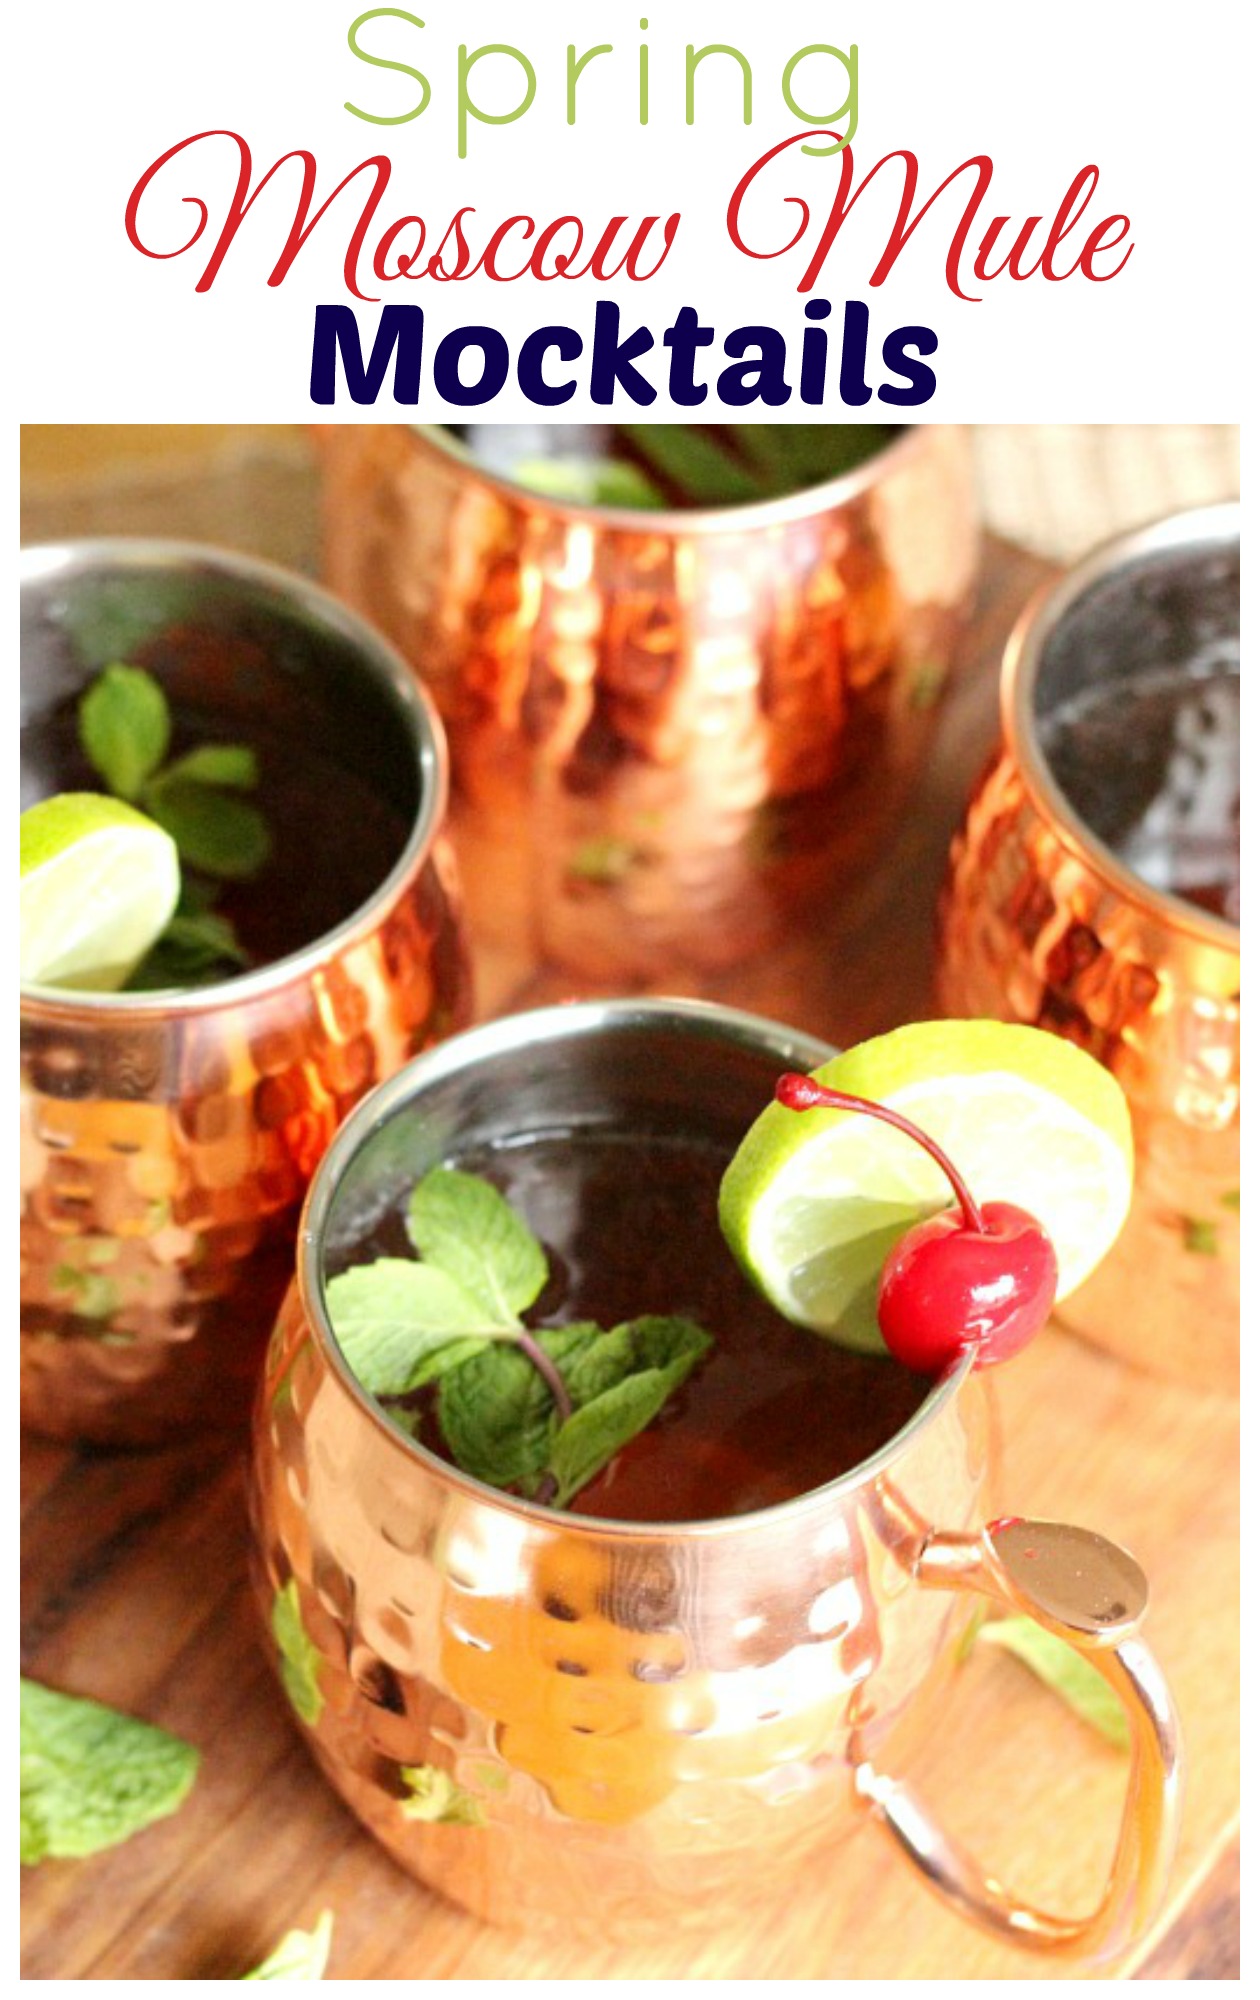 Spring Moscow Mule Mocktail - Clever Housewife